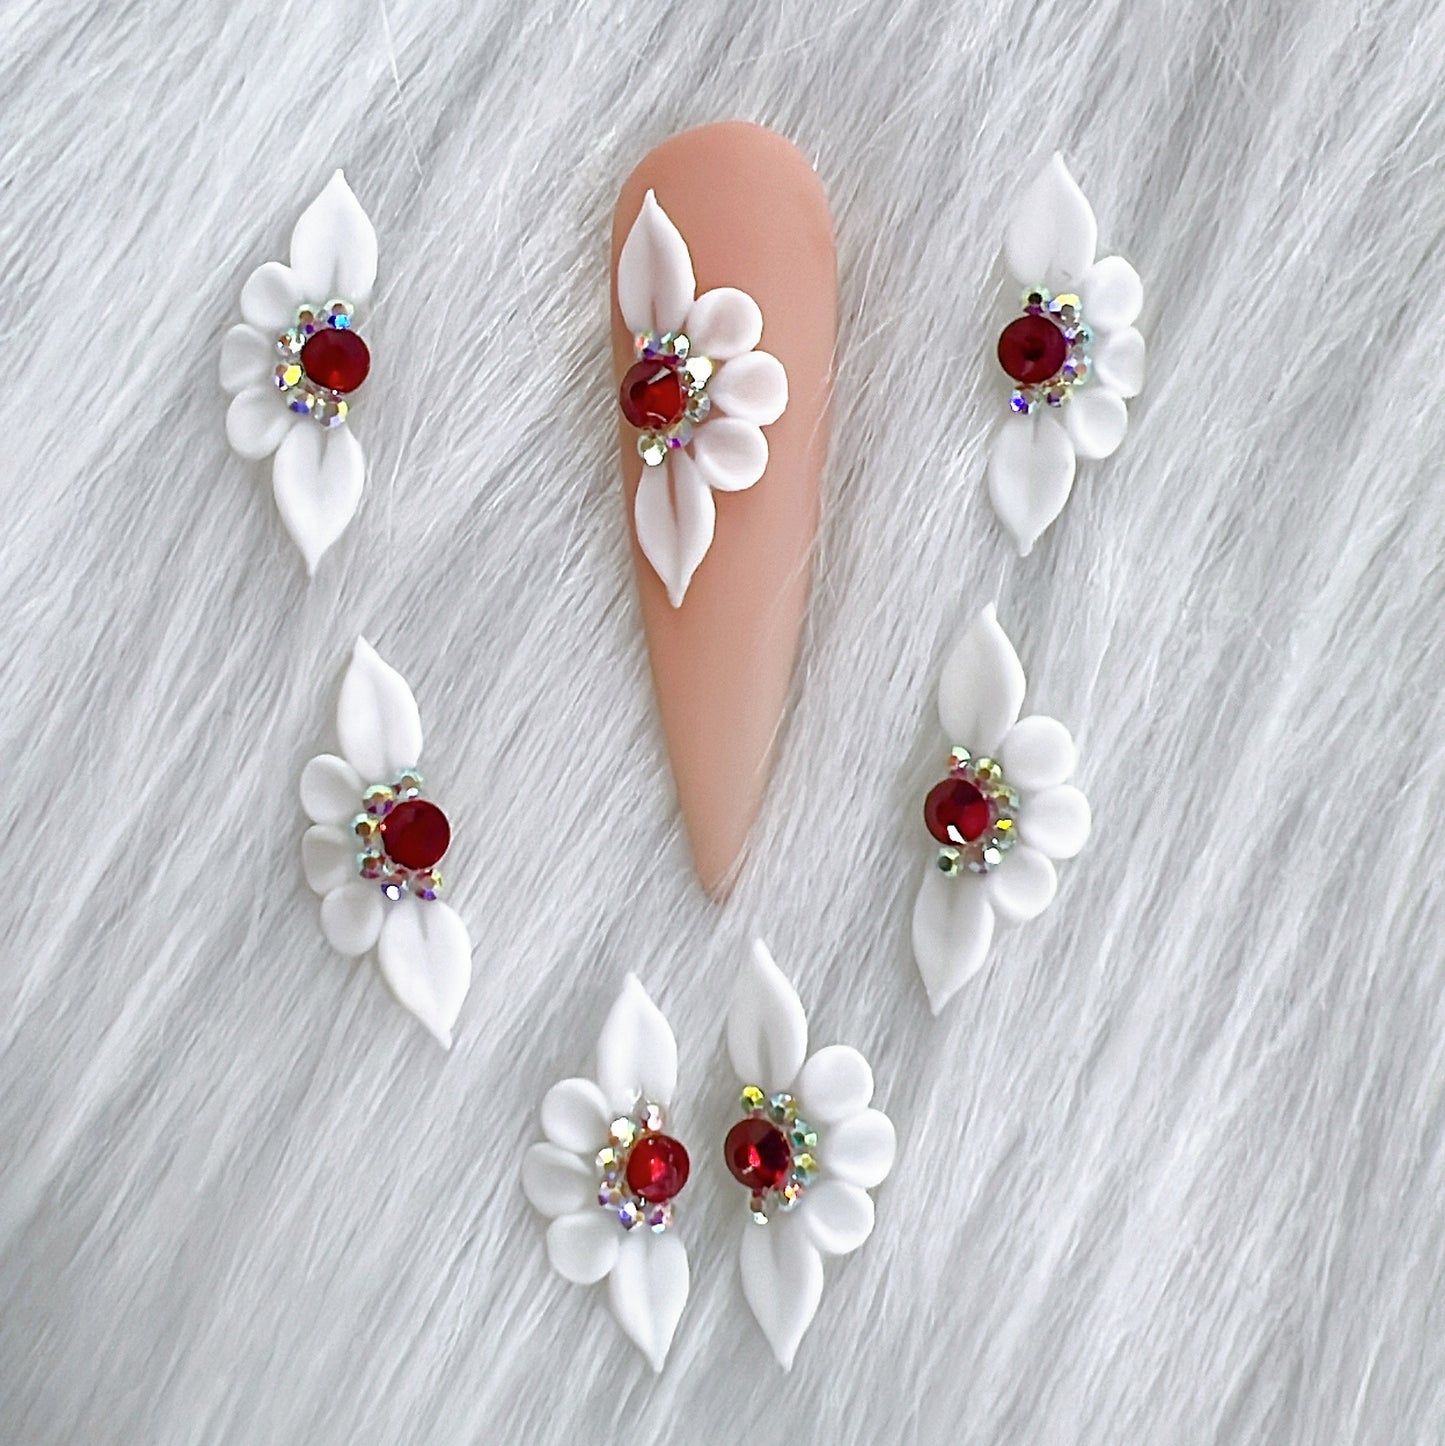 White 3D Acrylic Nail Flowers - For Christmas